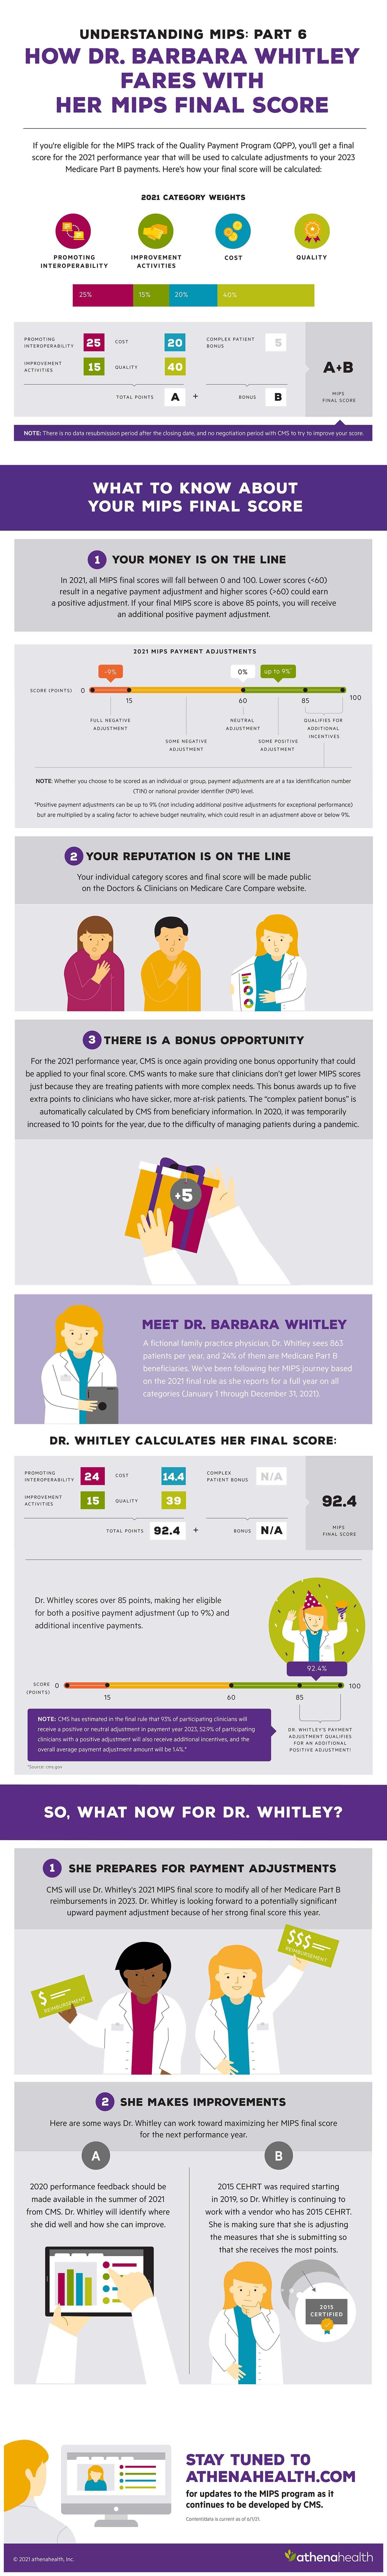 athenahealth infographic displaying explanatory flow of entire scoring, awards, and incentives system for evaluating medical care performance